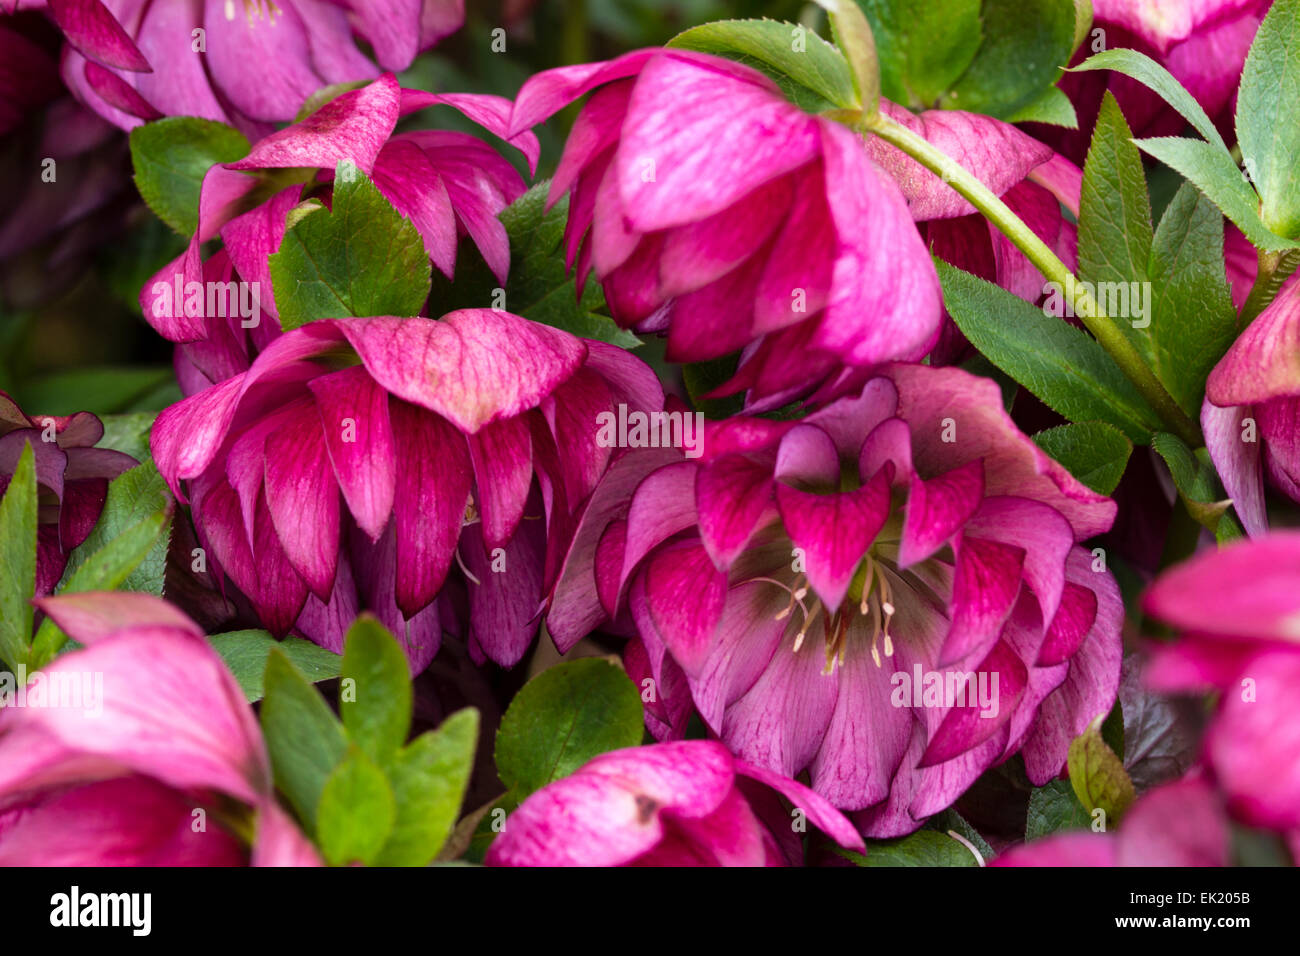 Double flowers of the early spring flowering lenten rose, Helleborus orientalis 'Harvington Double Red' Stock Photo